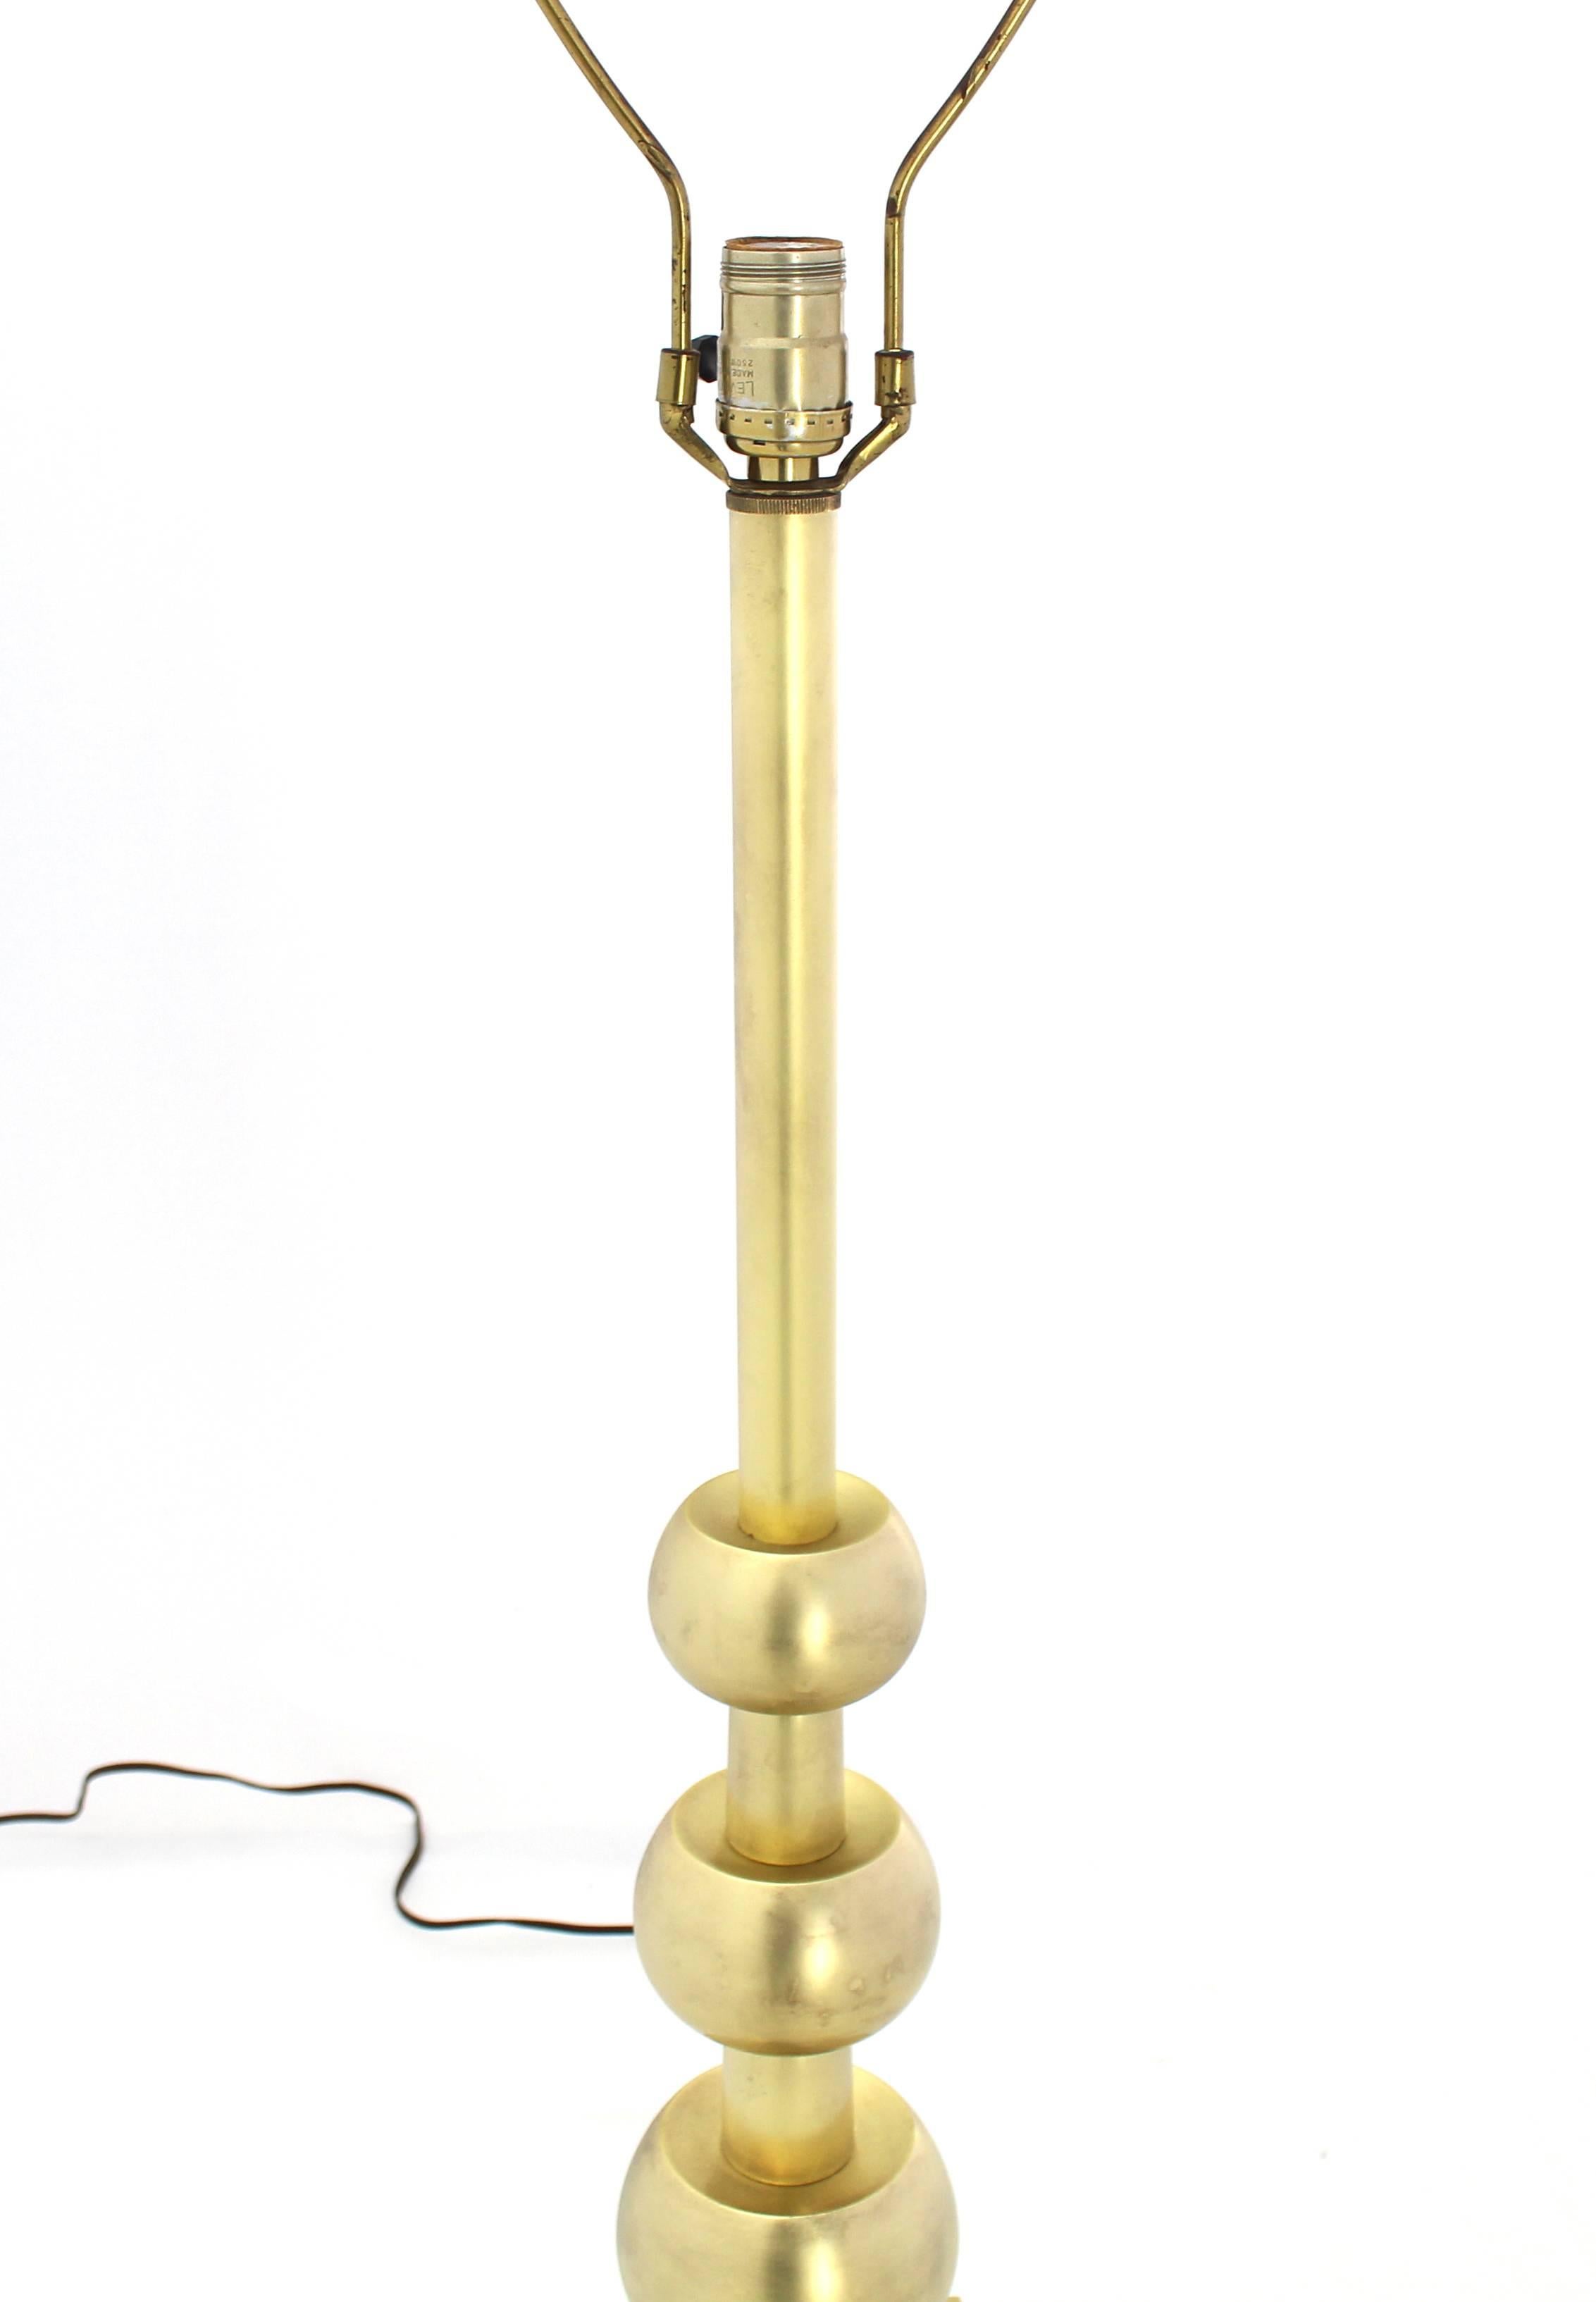 Stiffel Brass Table Lamp Mid Century Modern Stacked Orbits Jacks Base Pattern In Excellent Condition For Sale In Rockaway, NJ